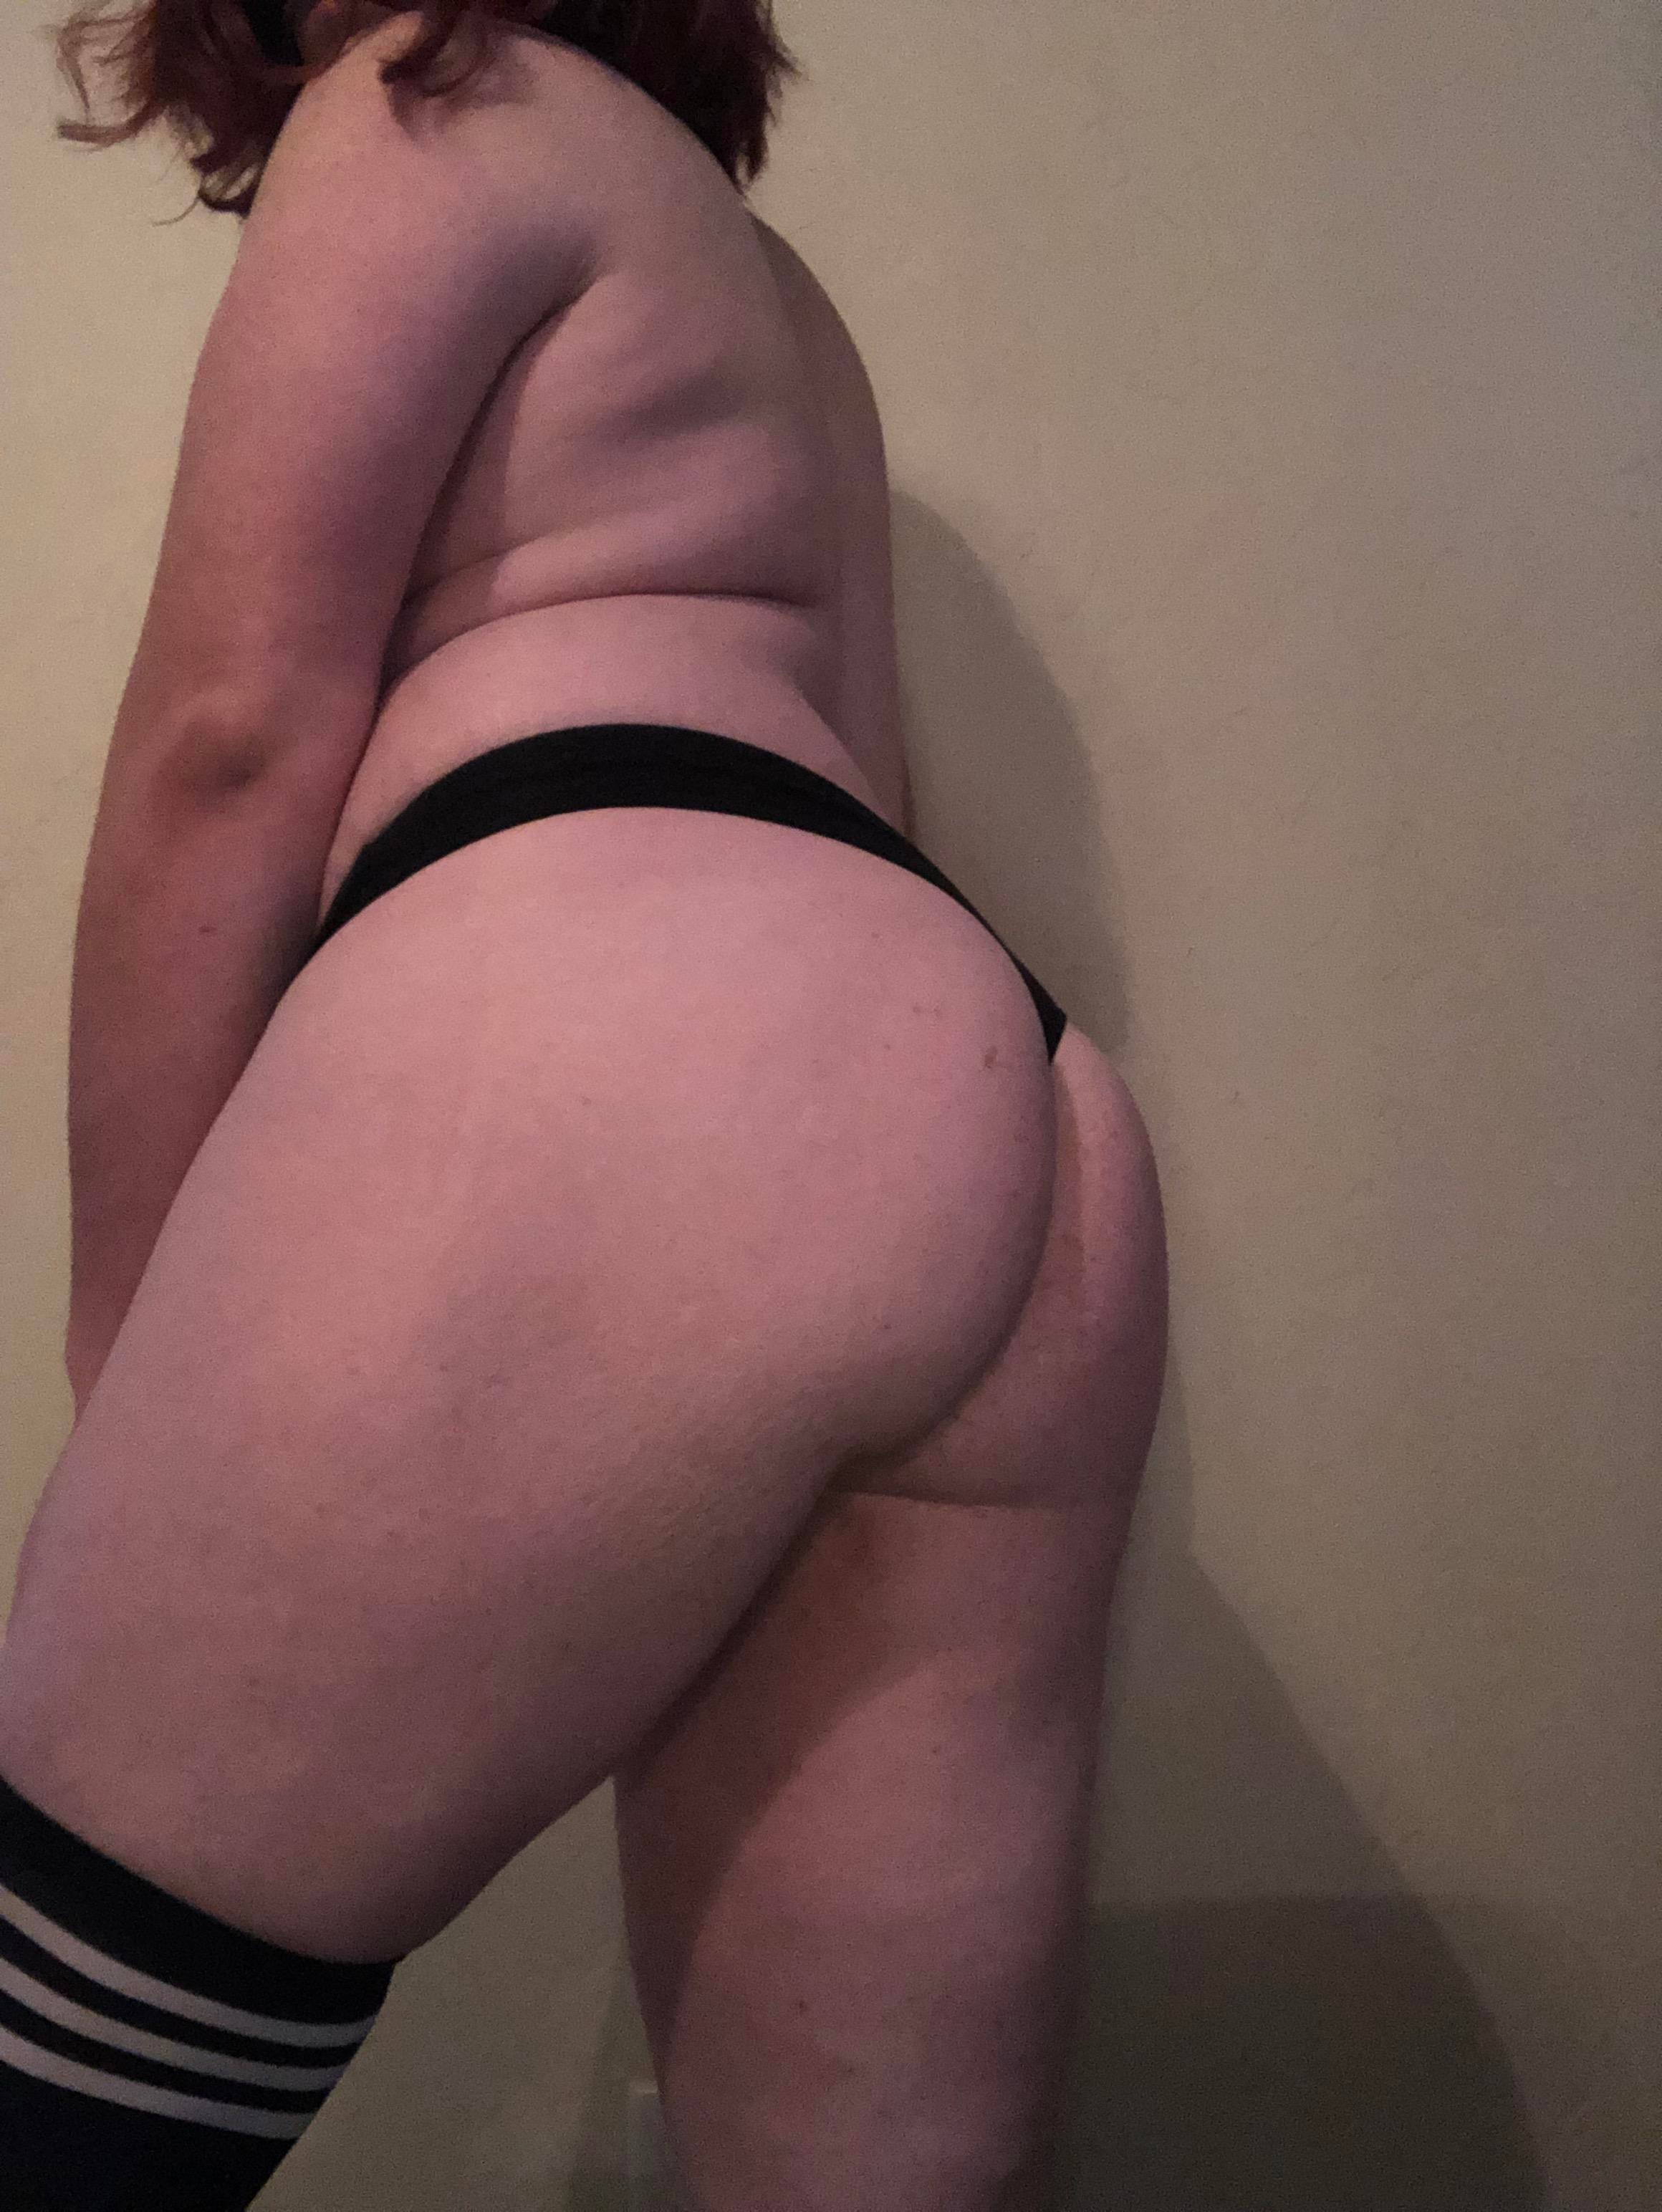 Who wants me to smother them with my ass? ze7mc4 - transexual woman